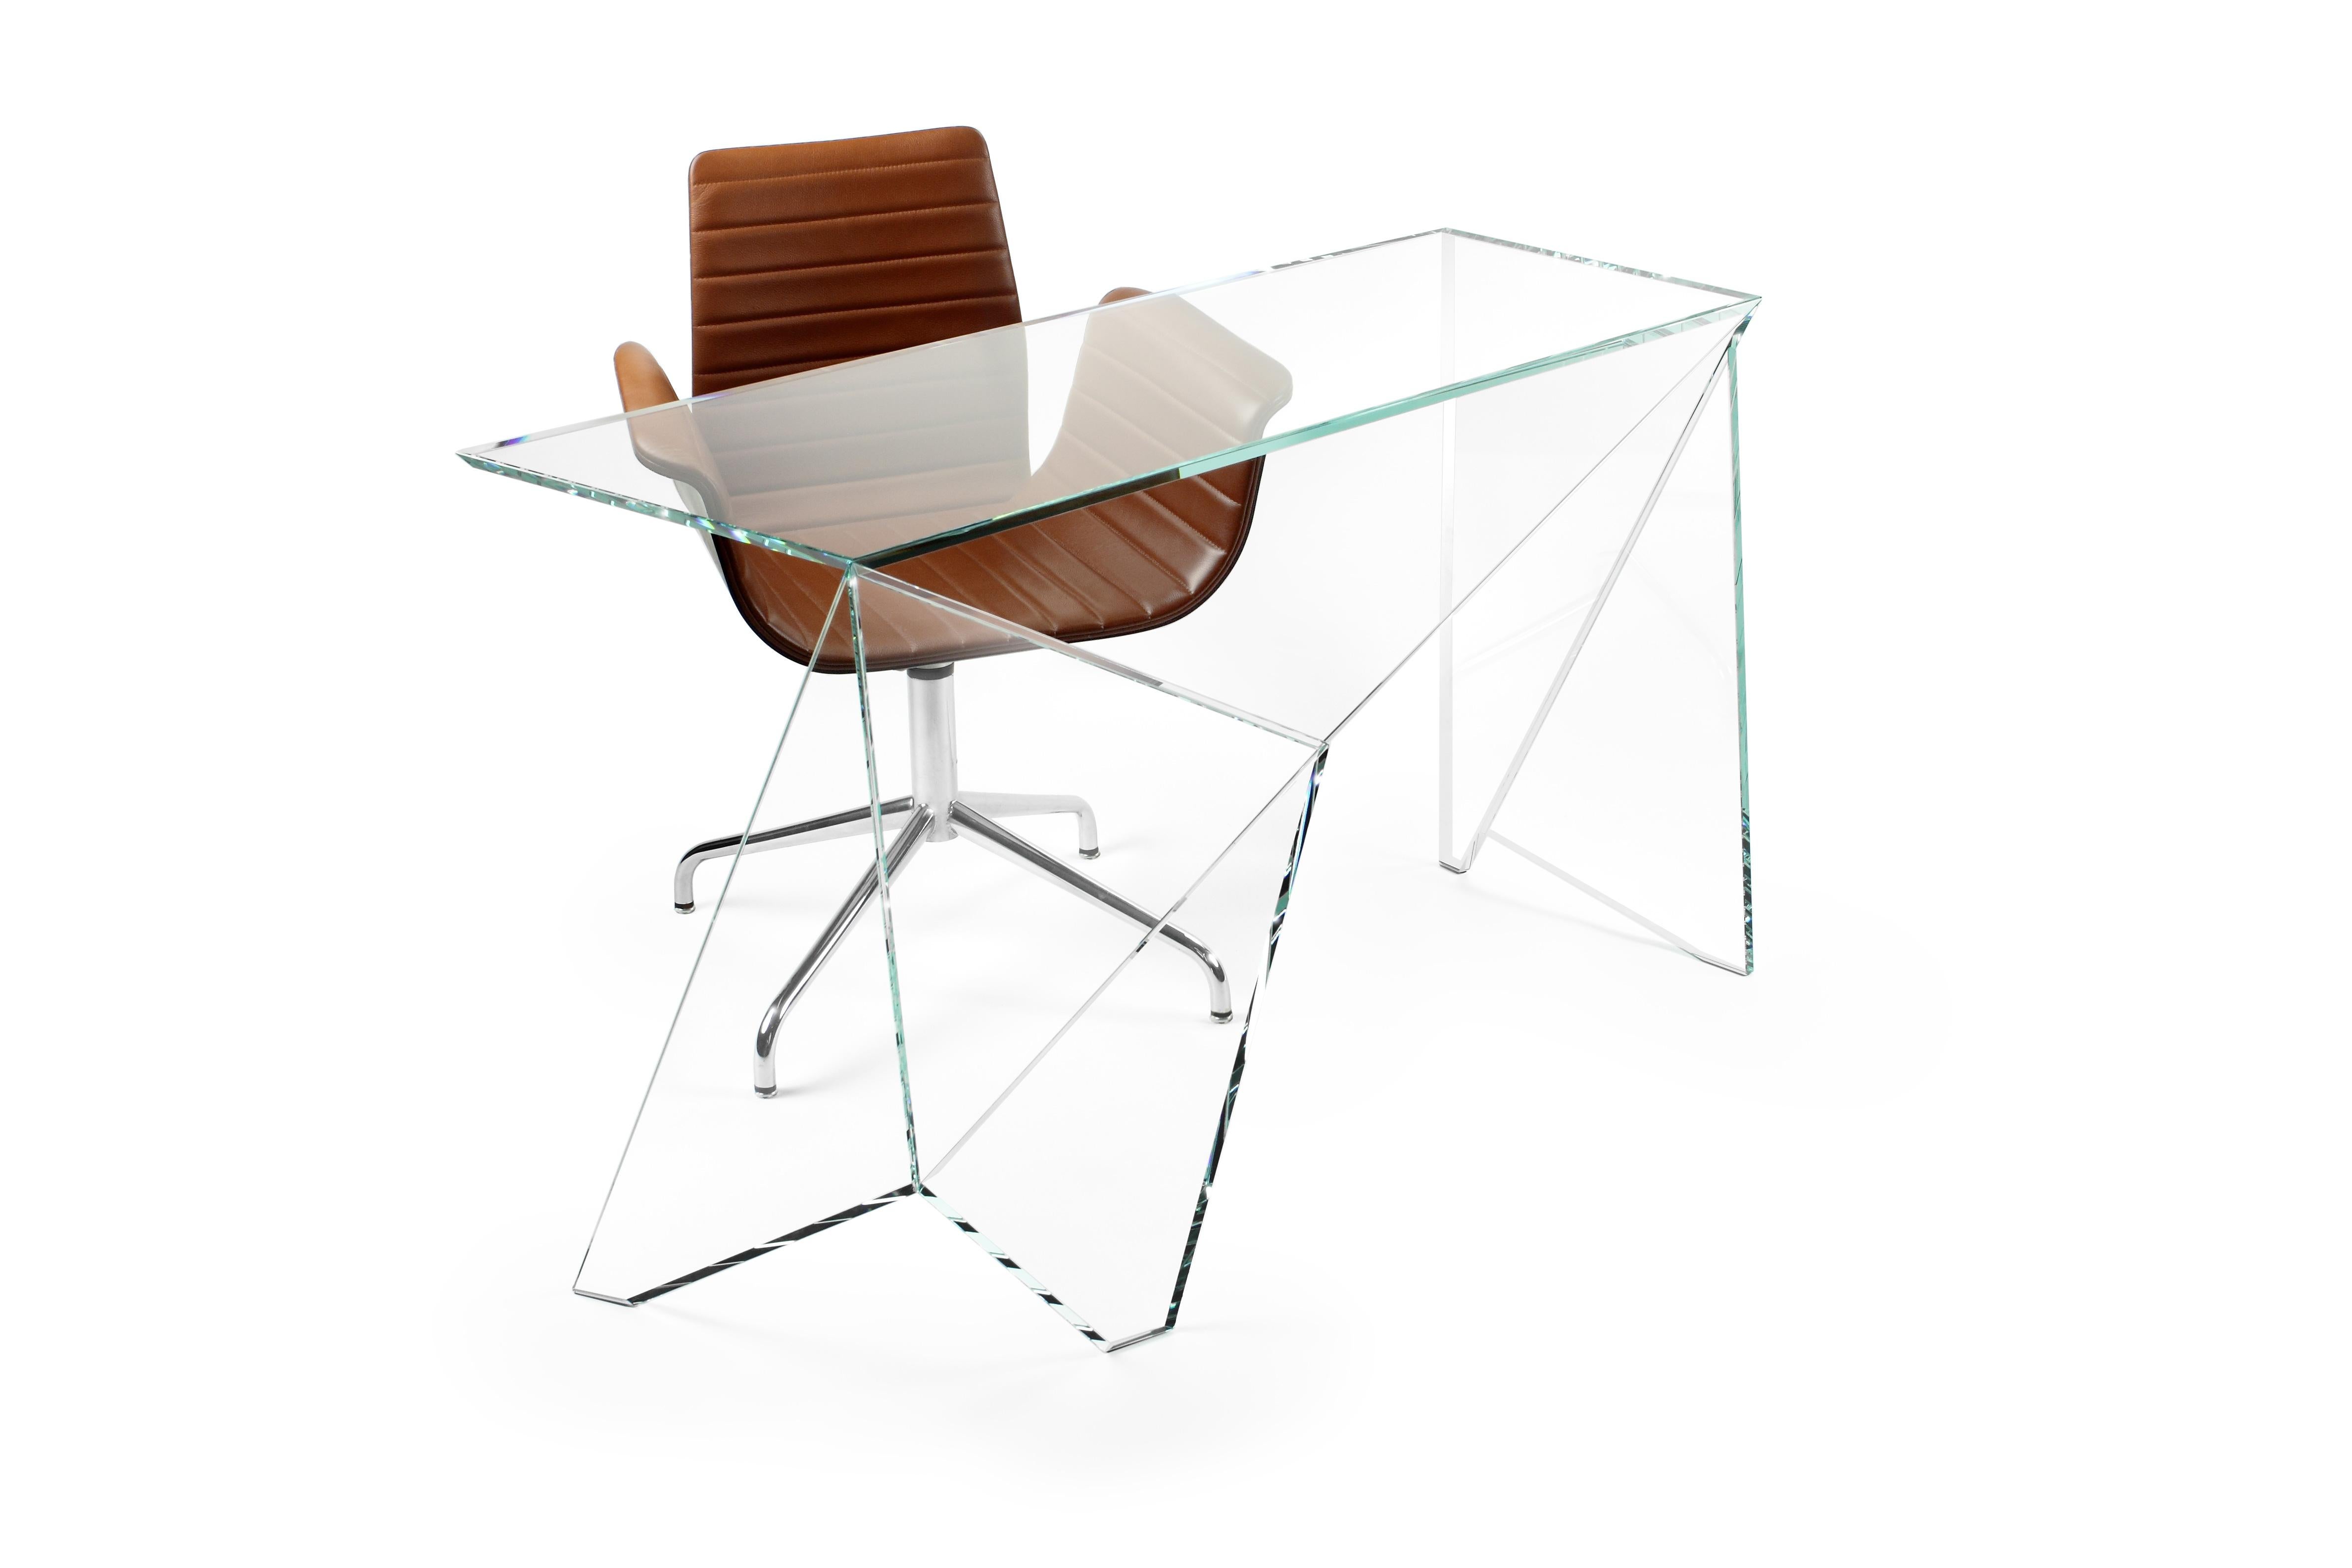 The desk 'Origami' is made of extra-clear crystal glass. Each sheet of extra-clear crystal glass is cut and ground with extreme precision, then the sheets are assembled by hand, having to fit together perfectly, the gluing operation requires extreme